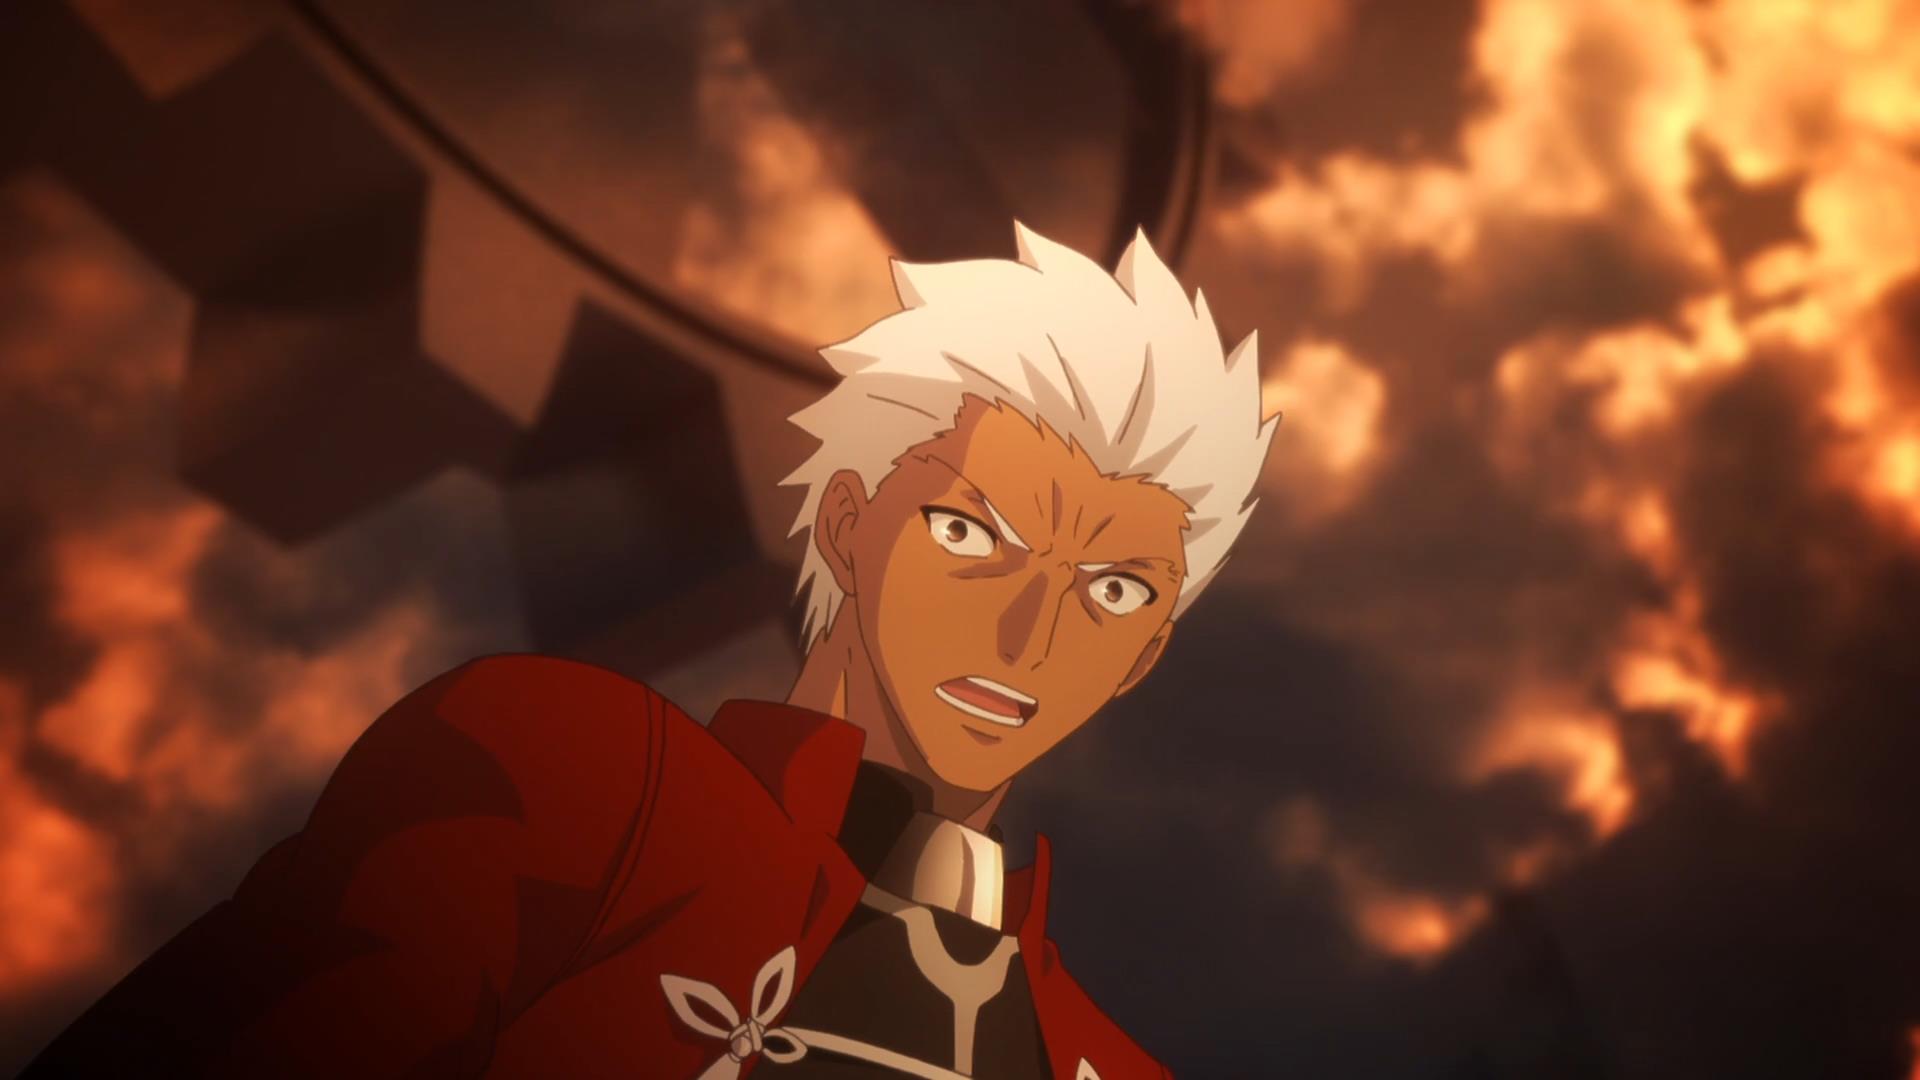 Fate/stay night: Unlimited Blade Works - 20 ("He's not quite dead